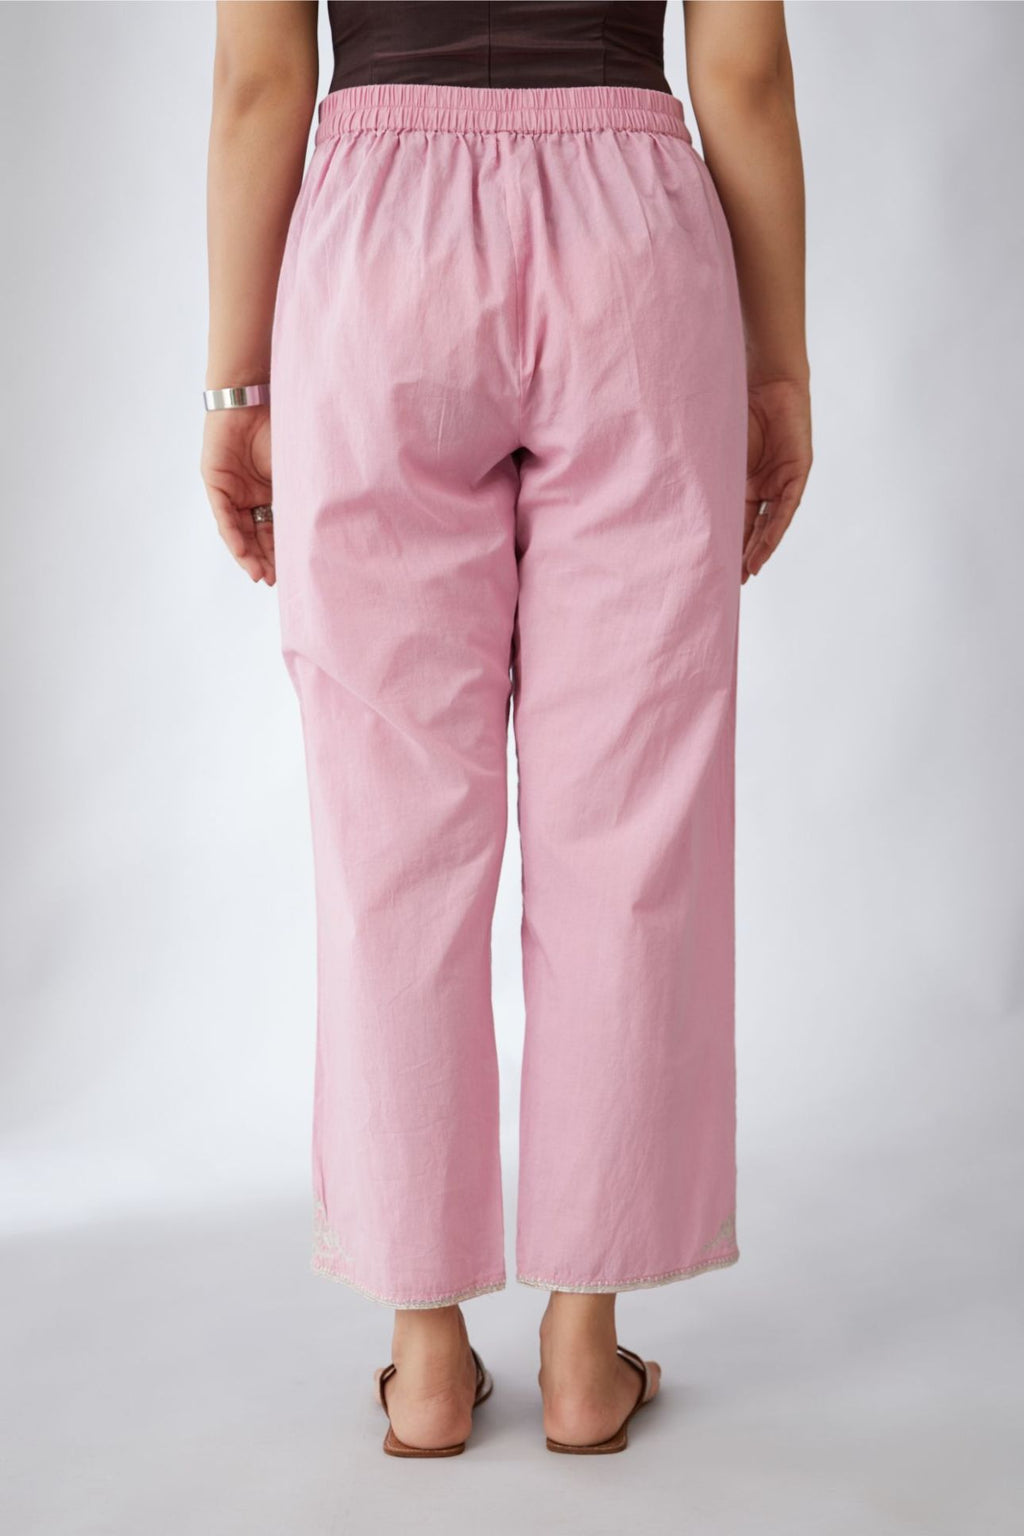 Pink cotton straight pants with silver embroidery detailing at bottom hem (Pants)